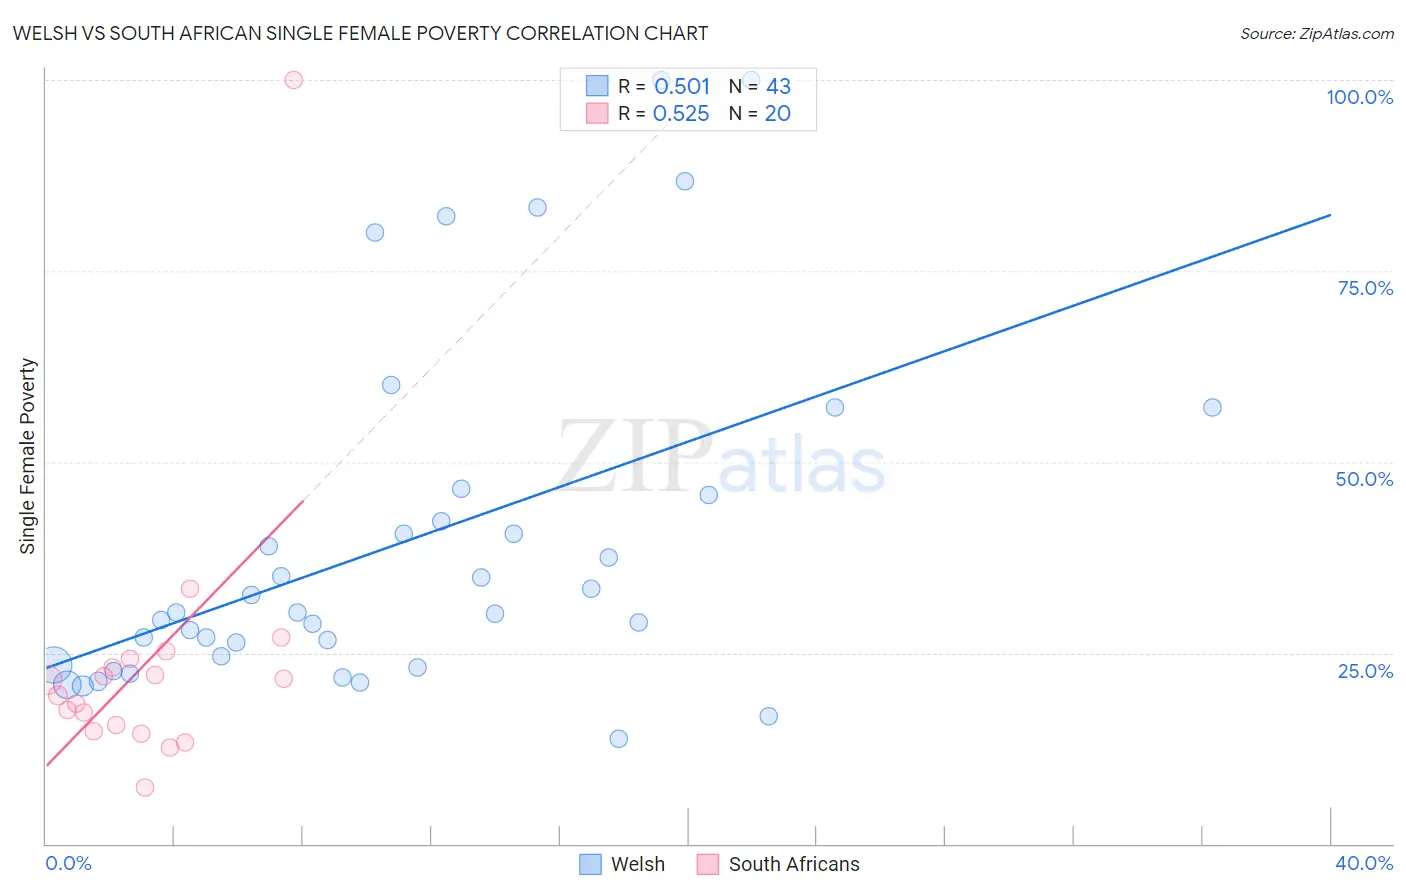 Welsh vs South African Single Female Poverty